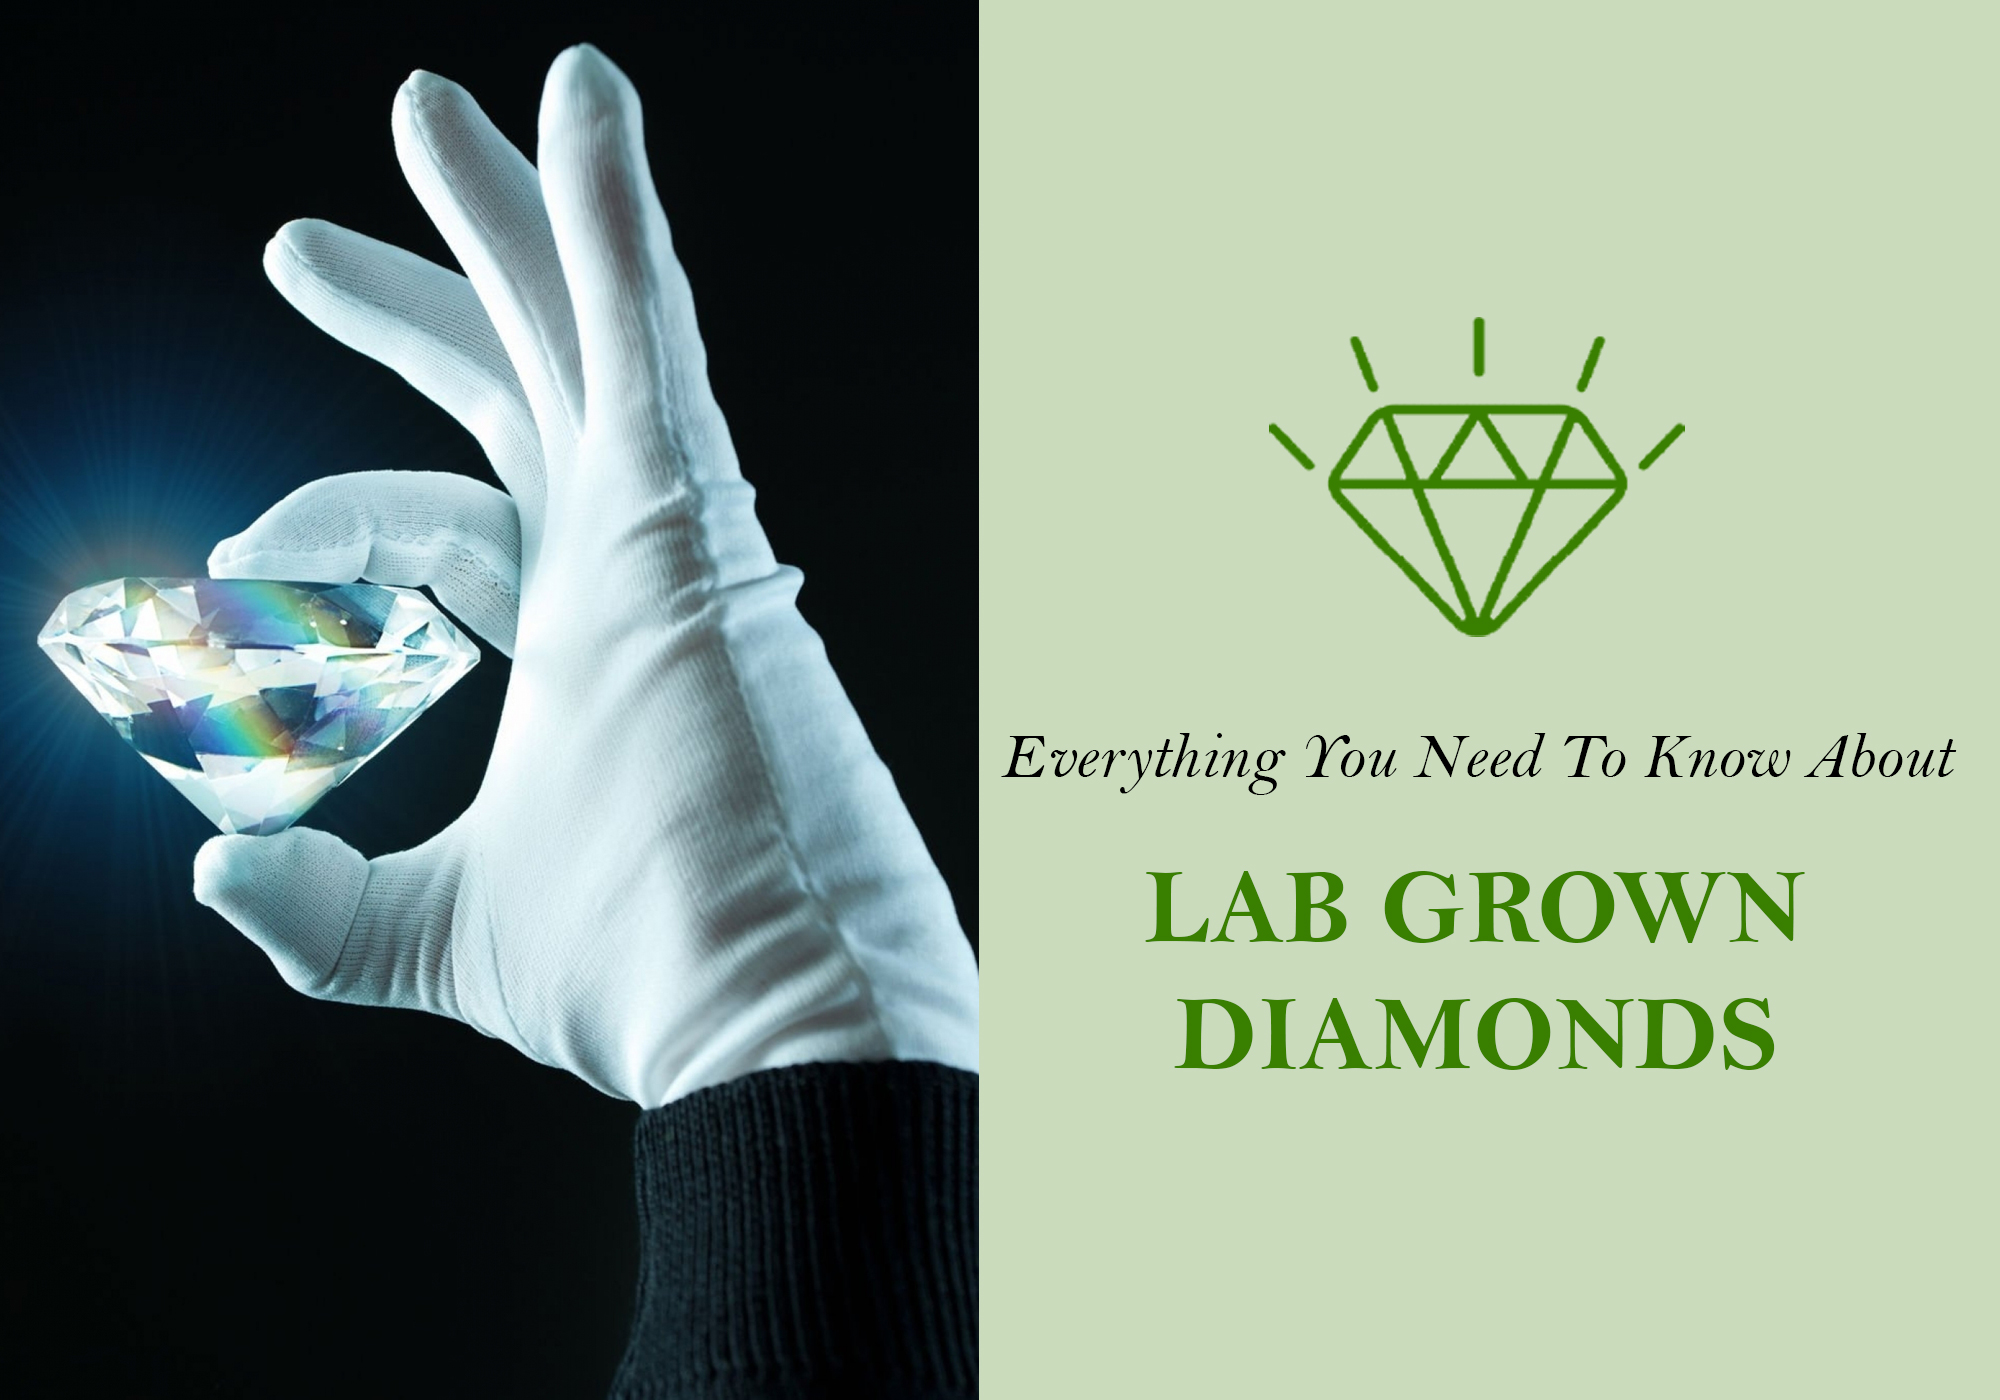 Why should you buy a lab grown diamond